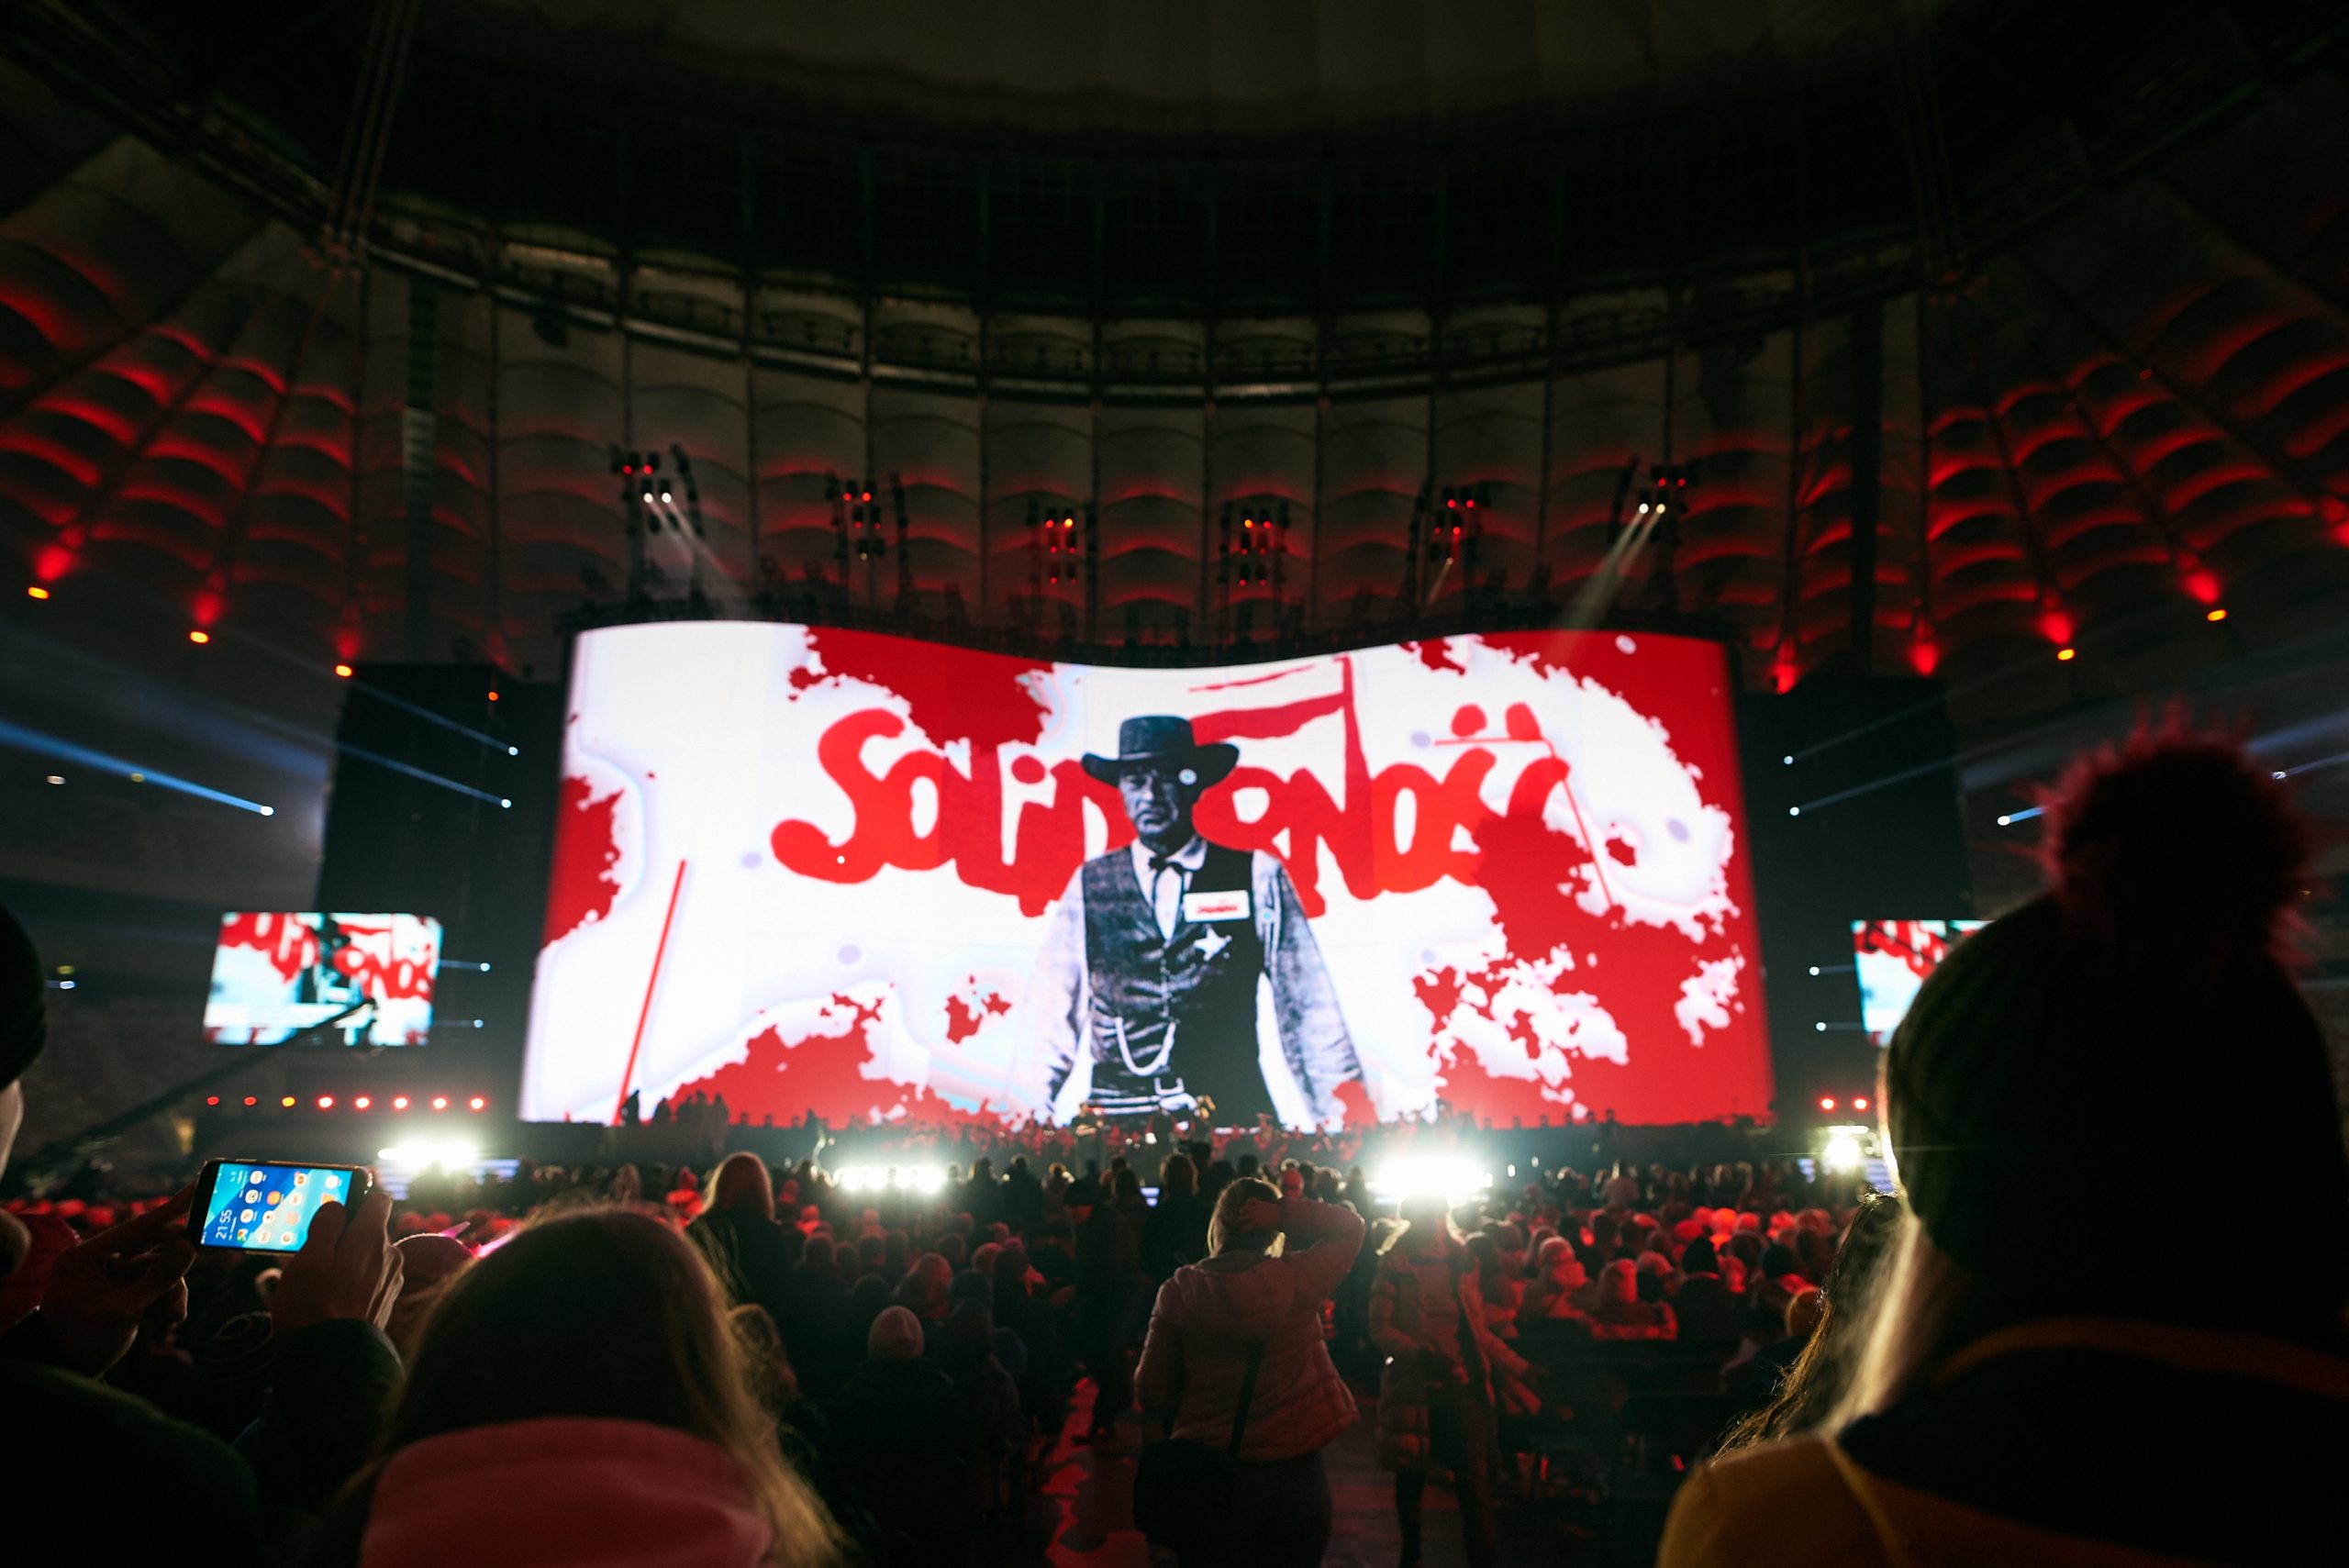 A photograph from the concert showing an outdoor screen with the “Solidarity” logo